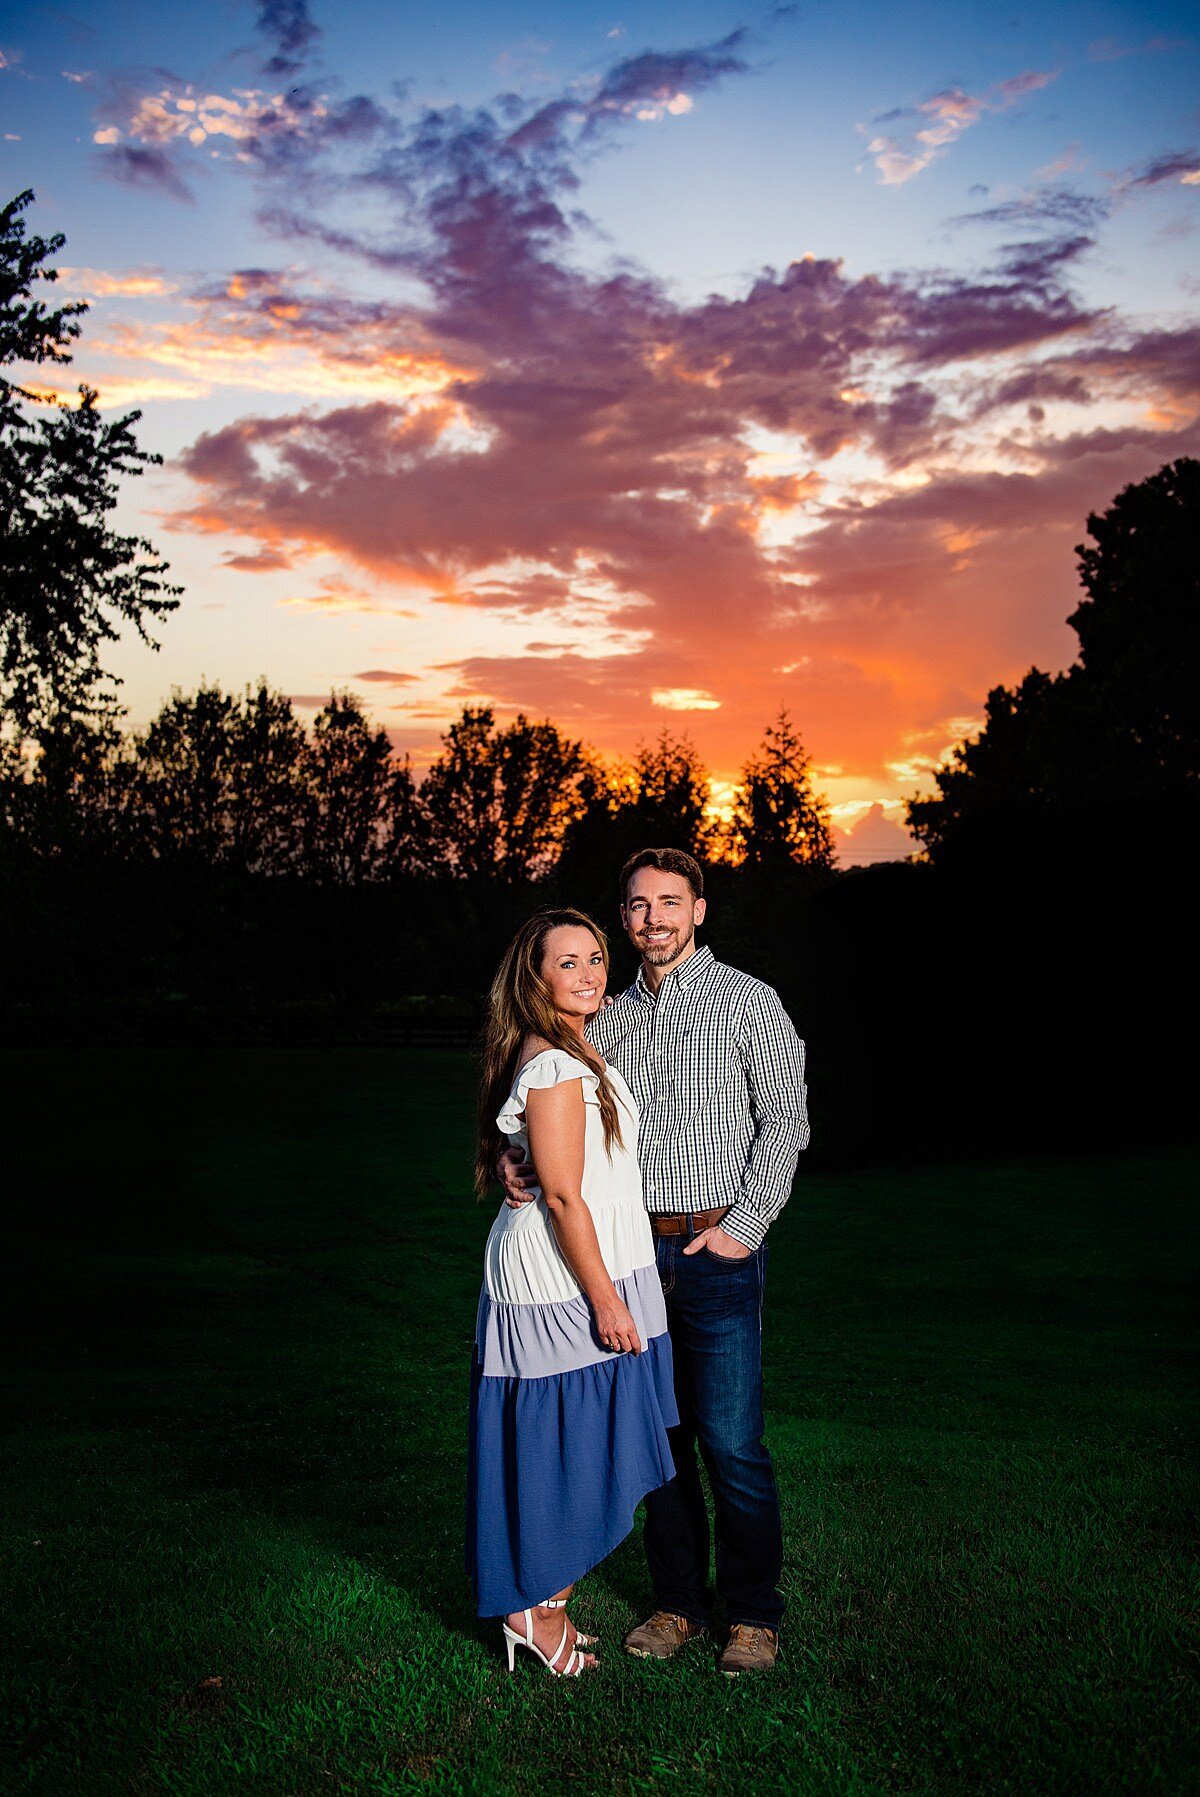 Bright Orange, Purple and Blue sunset with engaged couple standing together and smiling at the camera